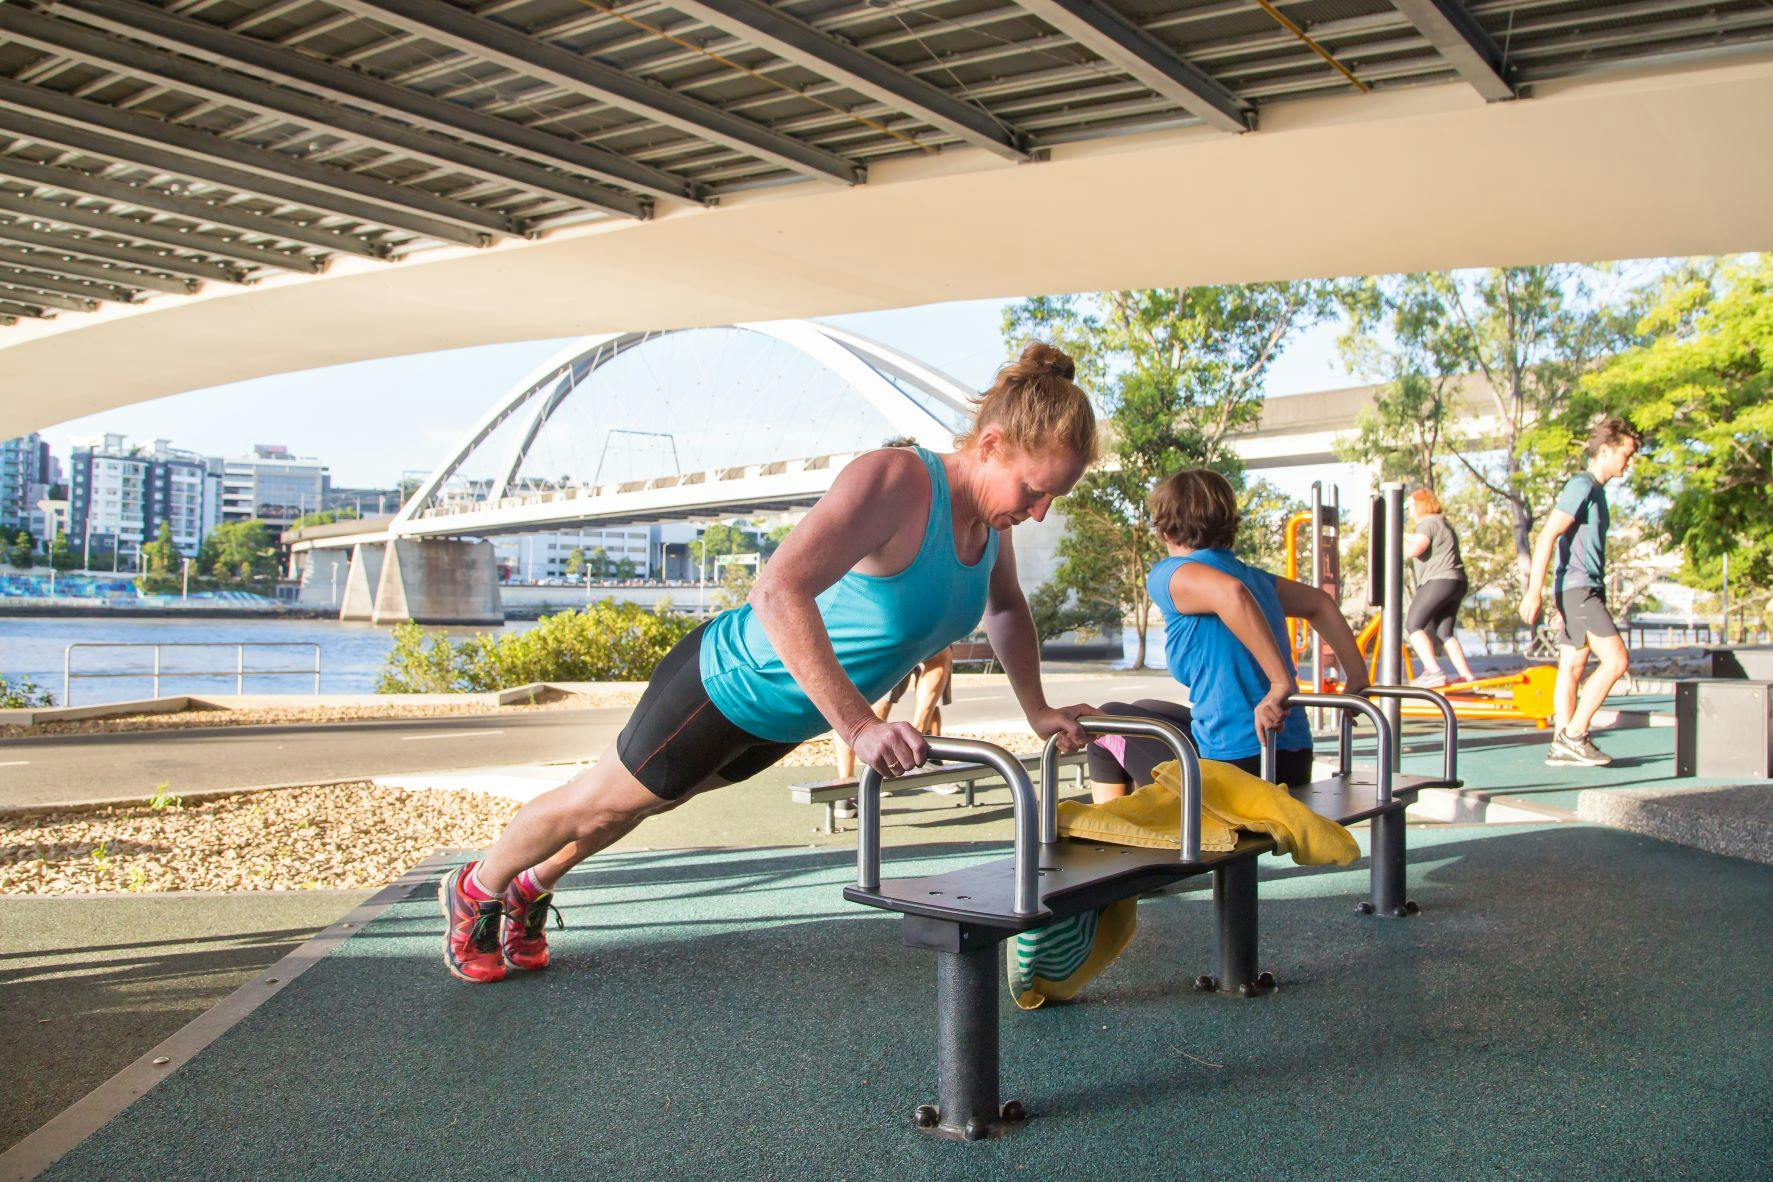 Image of a person using outdoor gym equipment